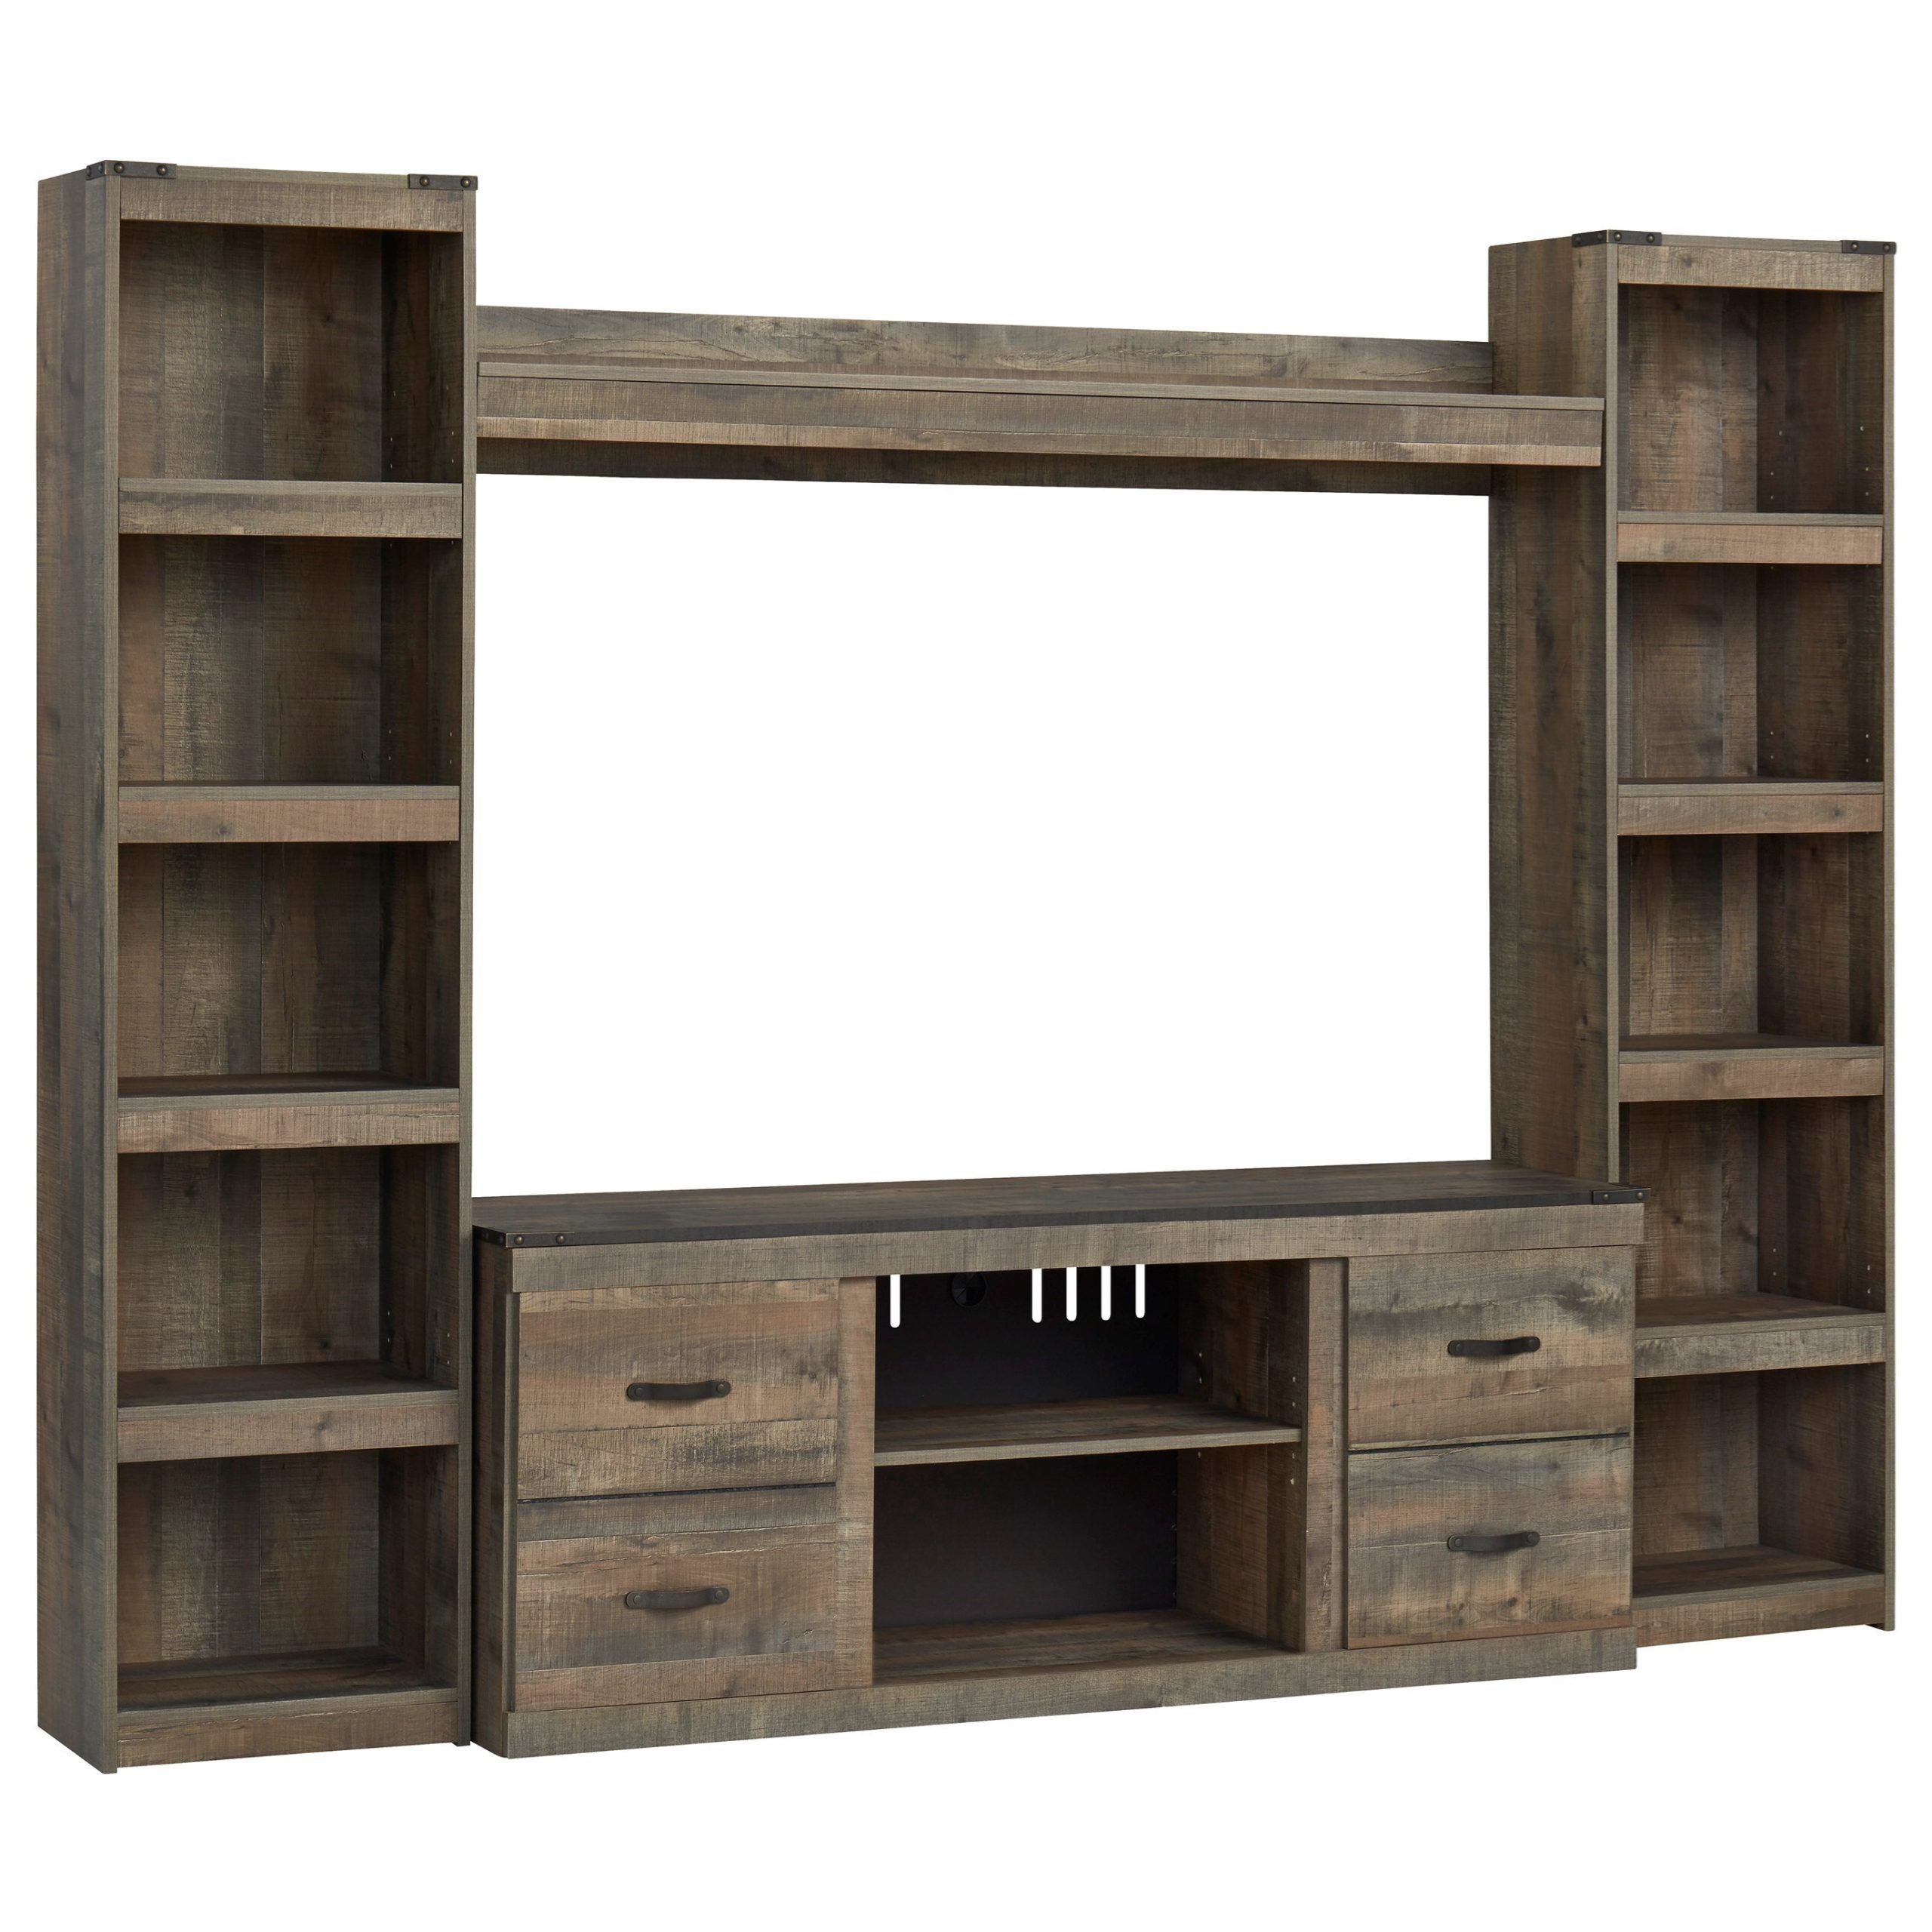 Signature Designashley Trinell Entertainment Wall Unit W/ Piers And For Entertainment Units With Bridge (View 13 of 20)